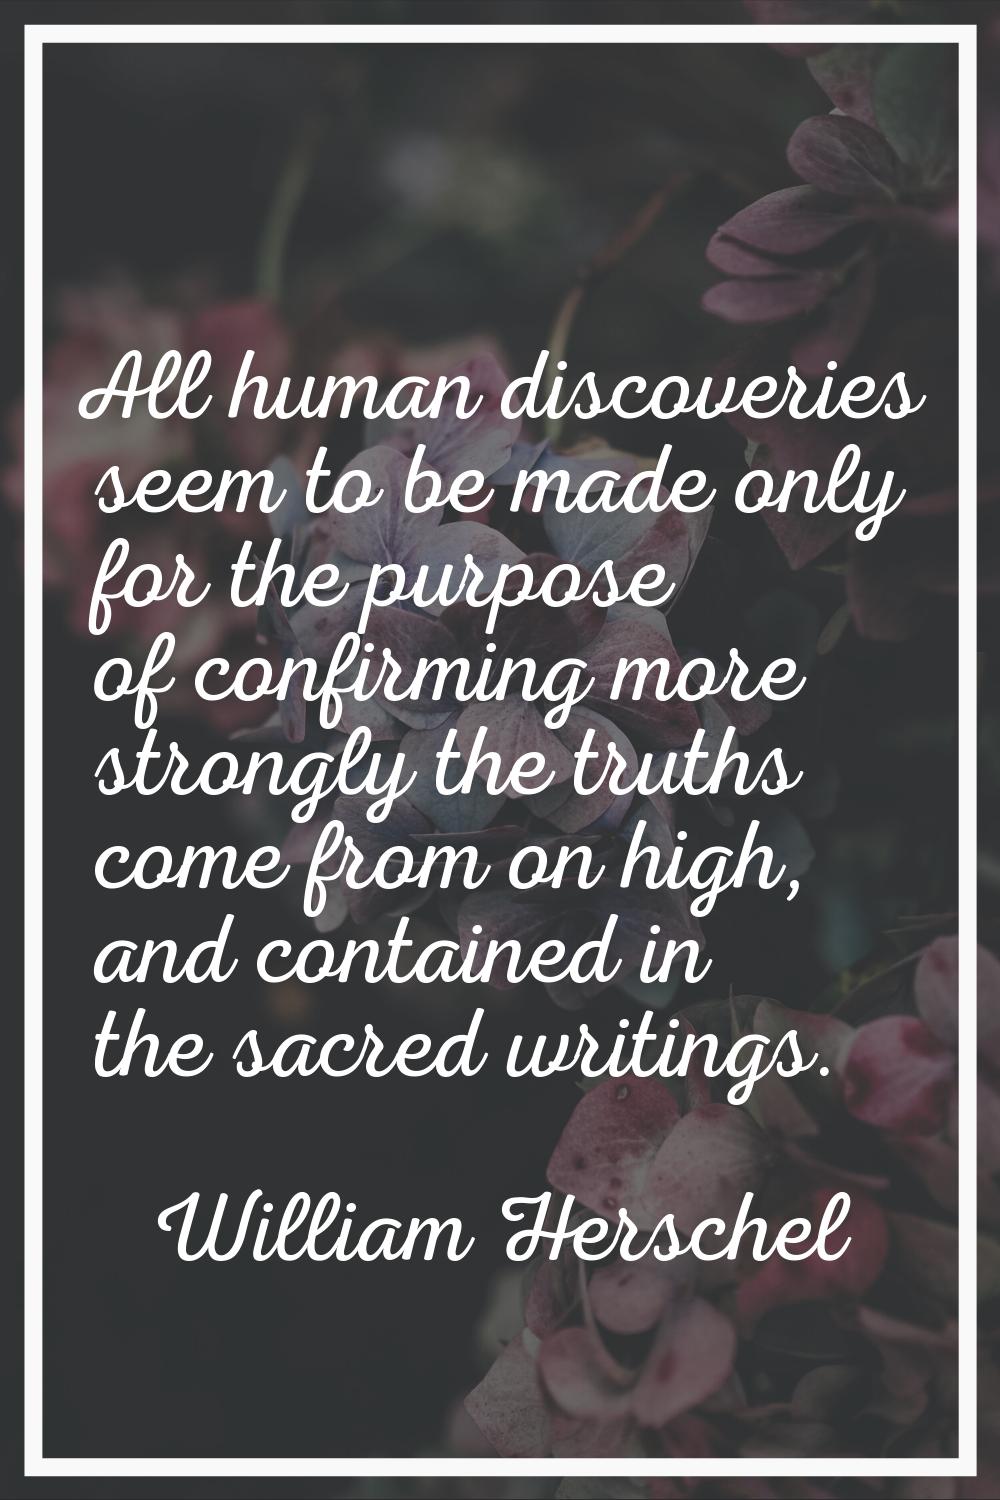 All human discoveries seem to be made only for the purpose of confirming more strongly the truths c